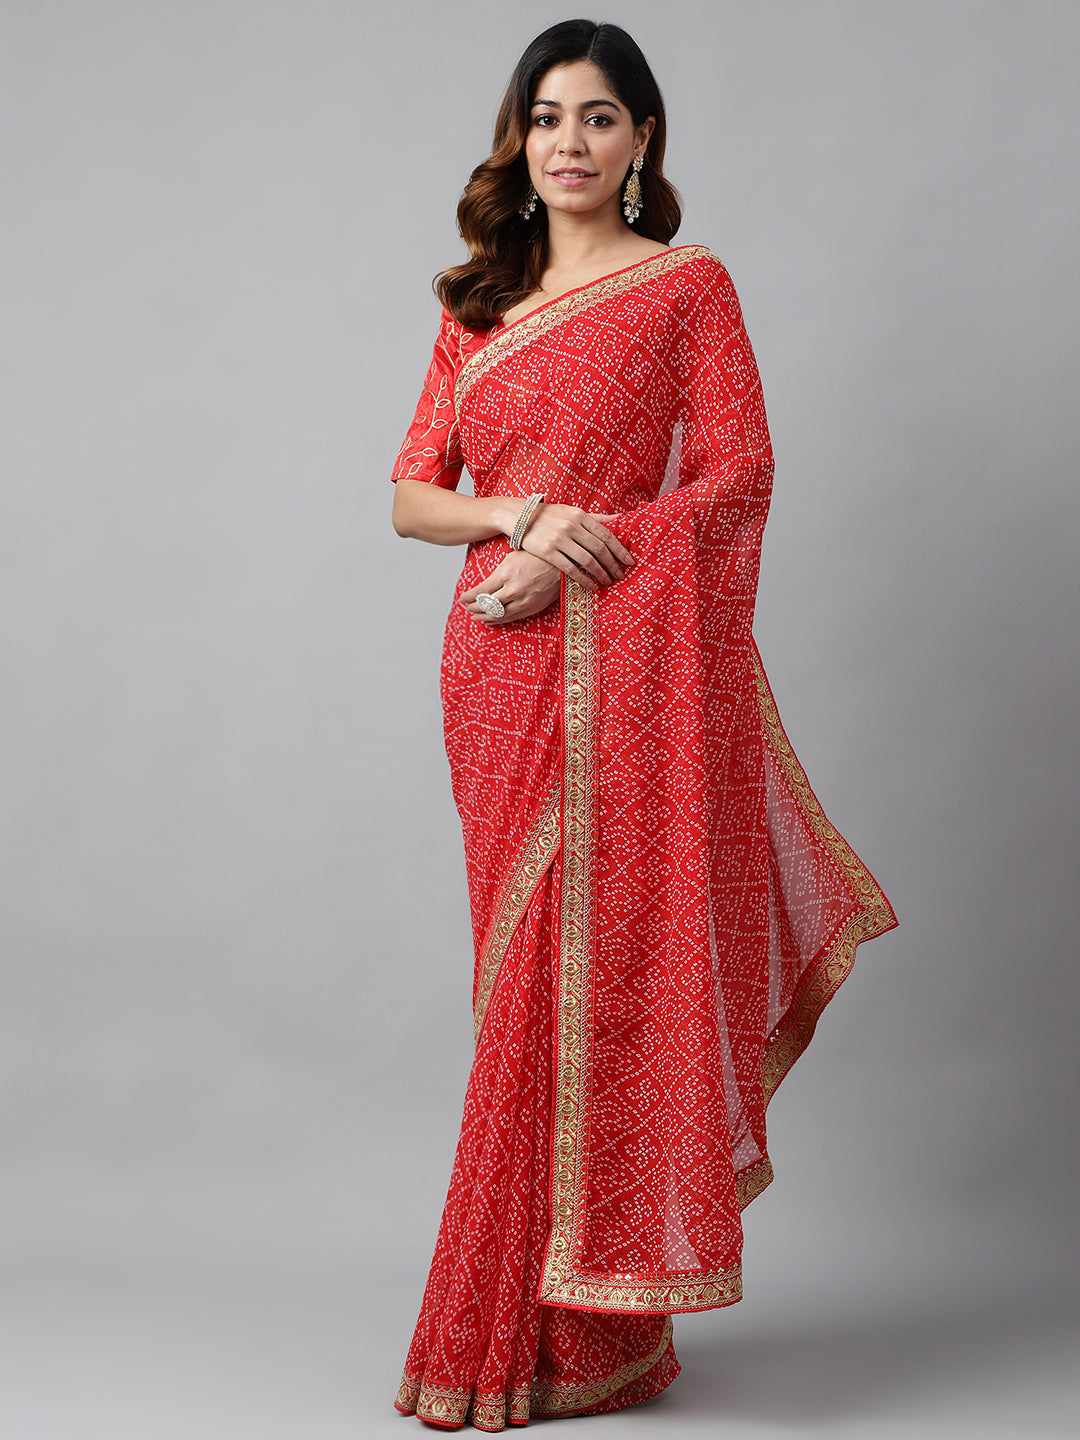 Printed & Embroidery Work In Lace Georgette Red Bandhani Saree For Women